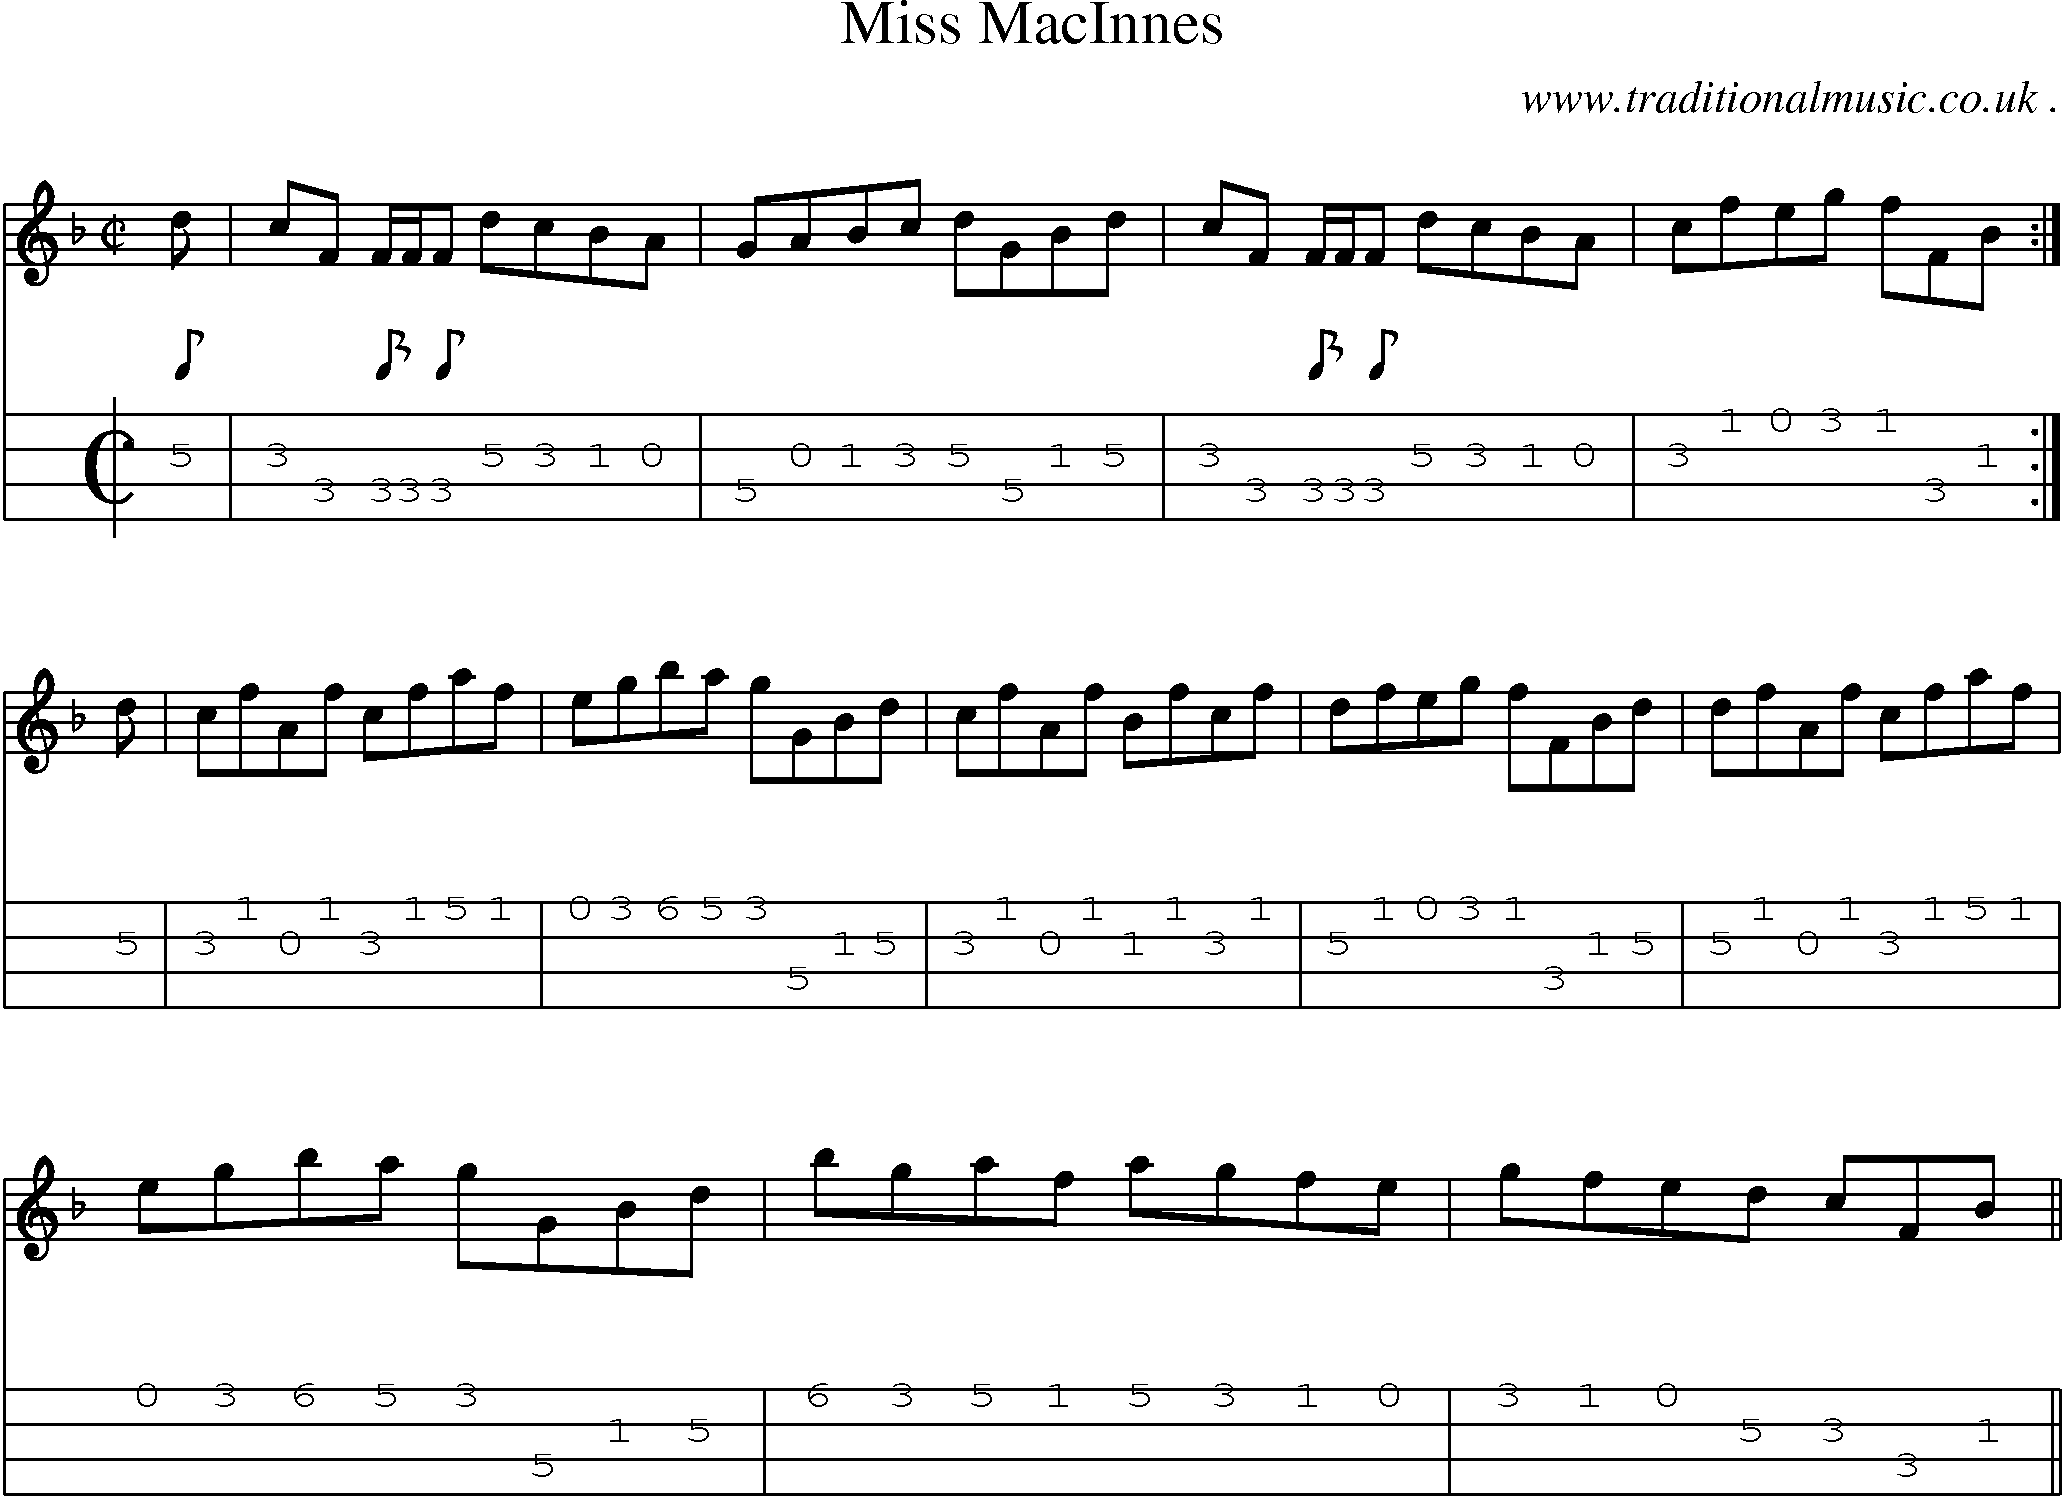 Sheet-music  score, Chords and Mandolin Tabs for Miss Macinnes